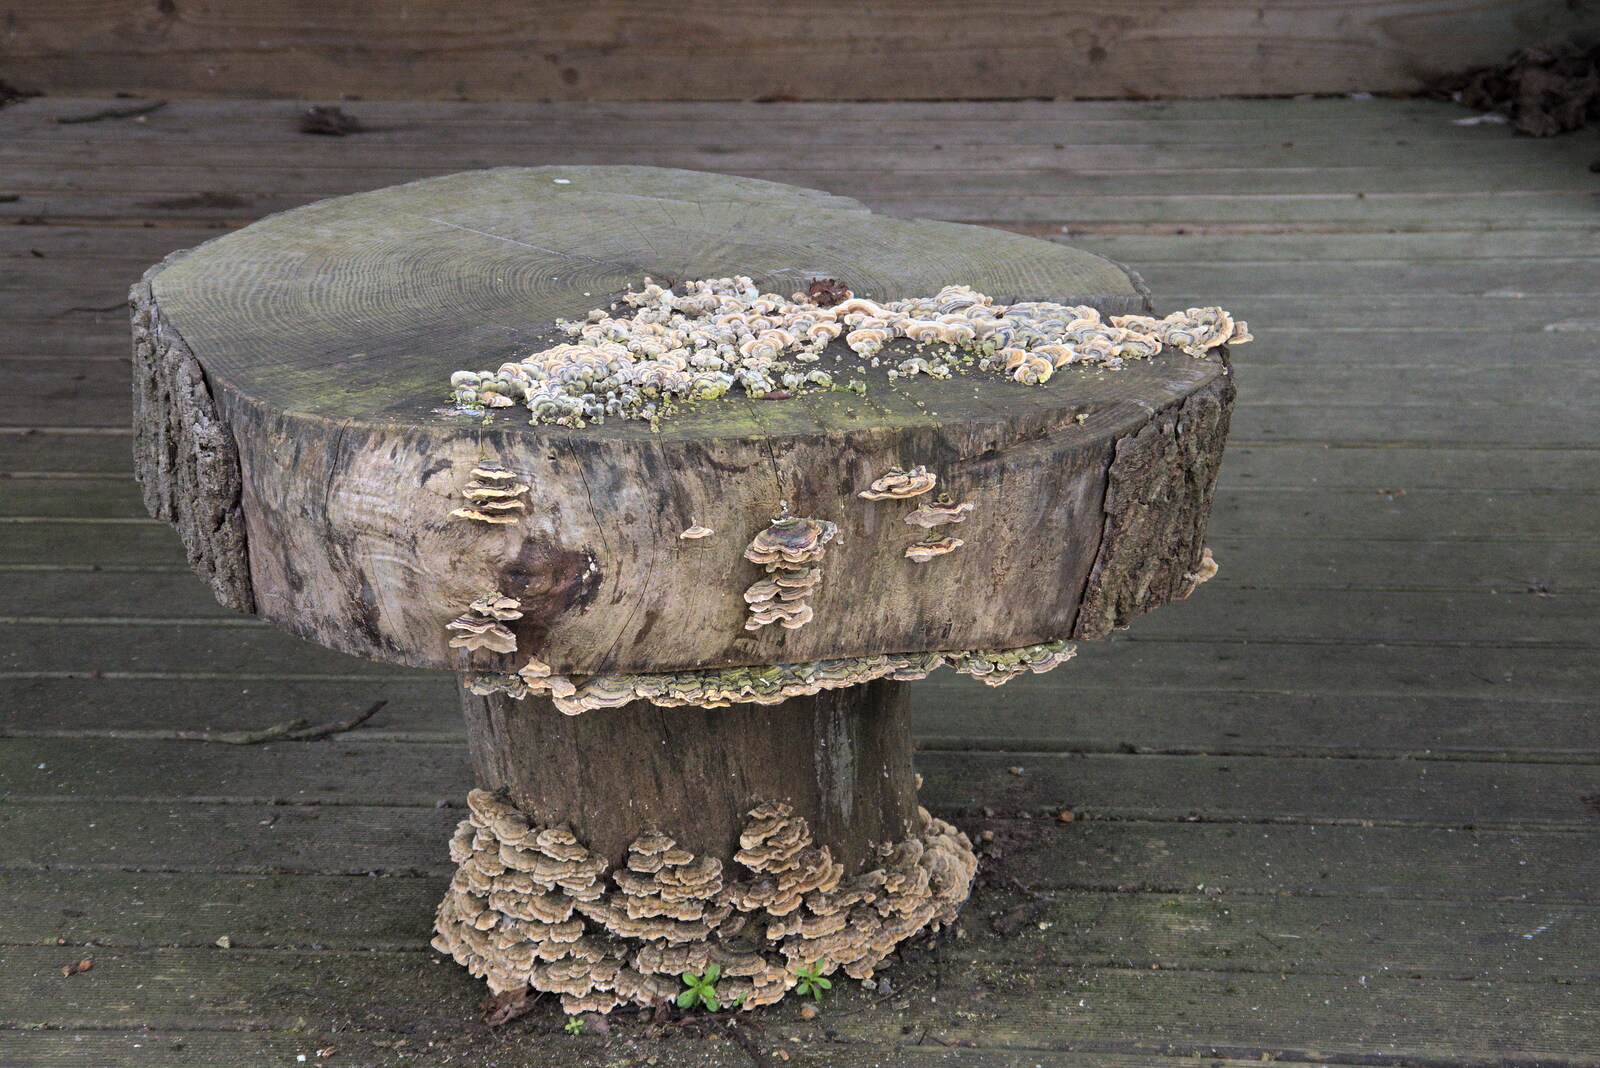 Fungus takes over a wooden table from The Oaksmere: 28 Weeks Later, Brome, Suffolk - 21st March 2021